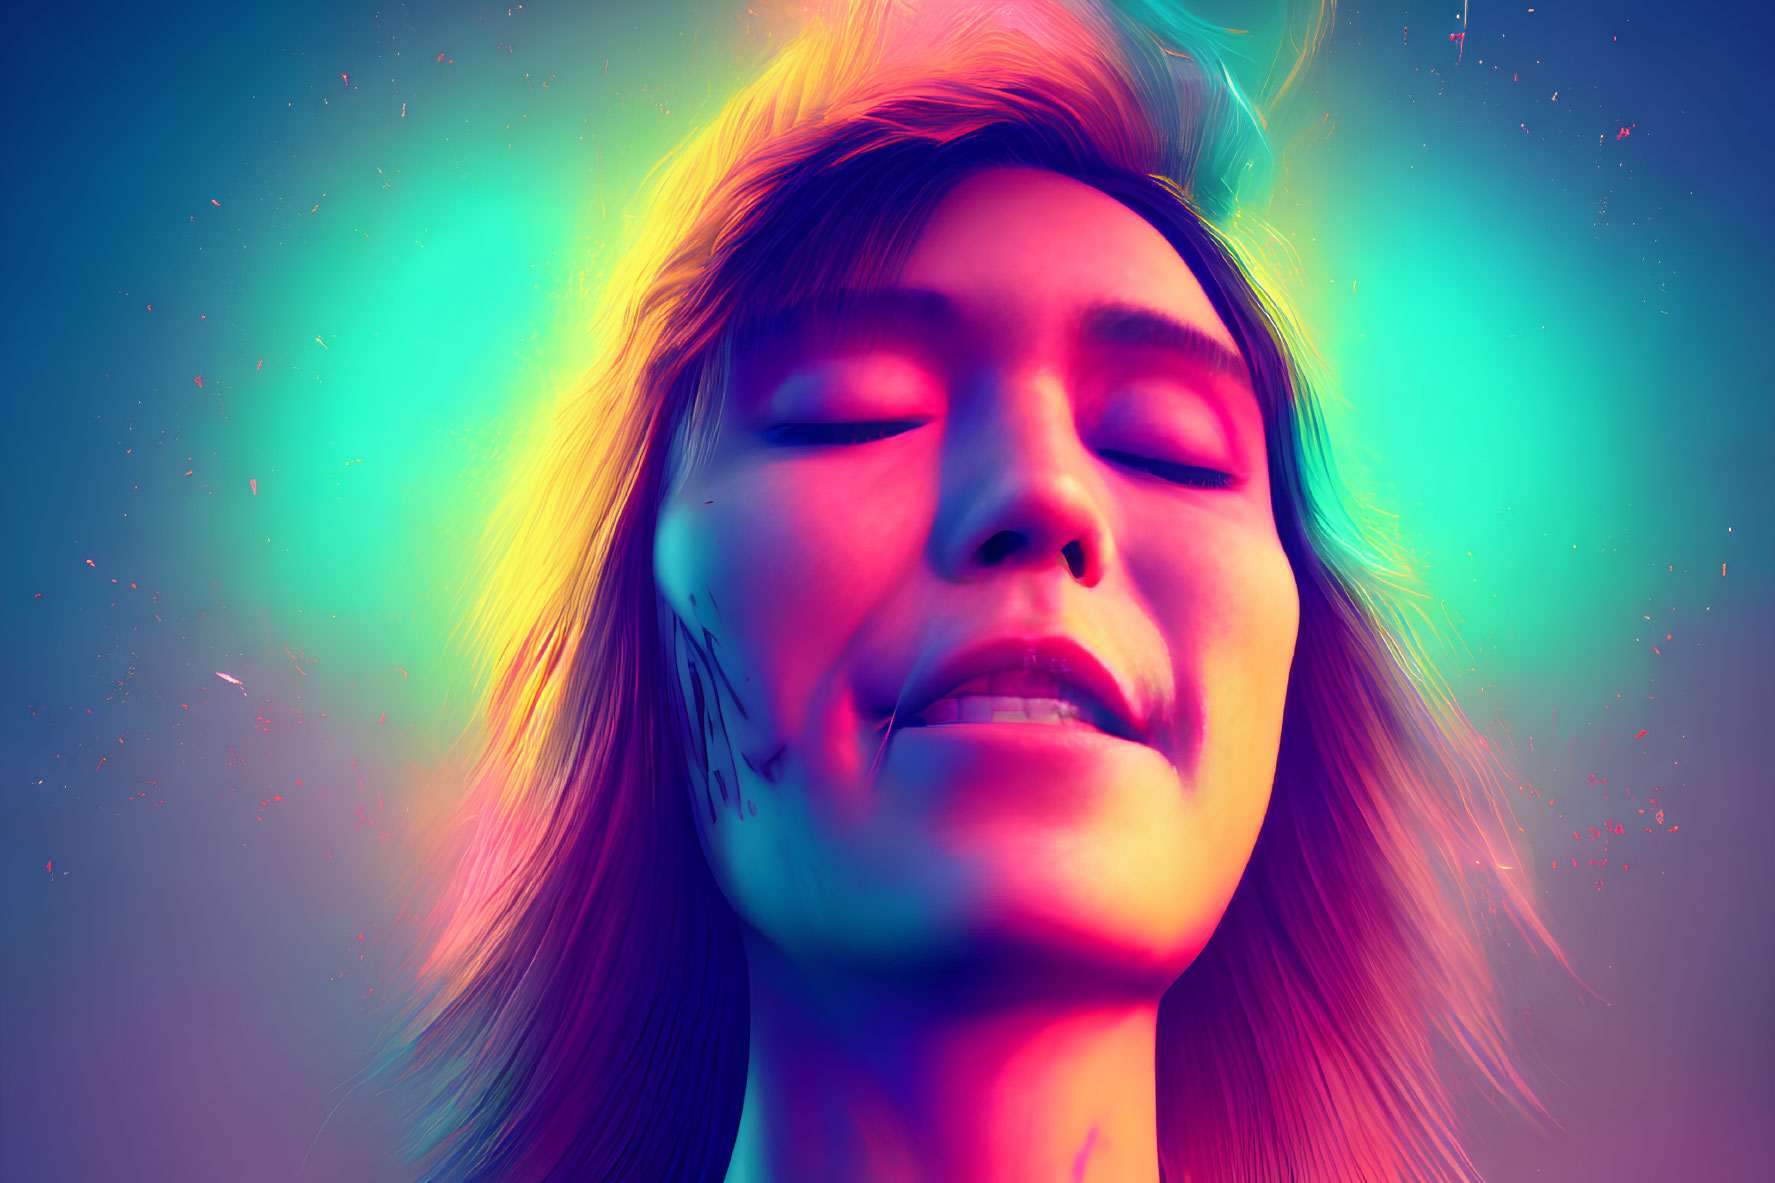 Woman bathed in vibrant neon pink and blue lights with closed eyes